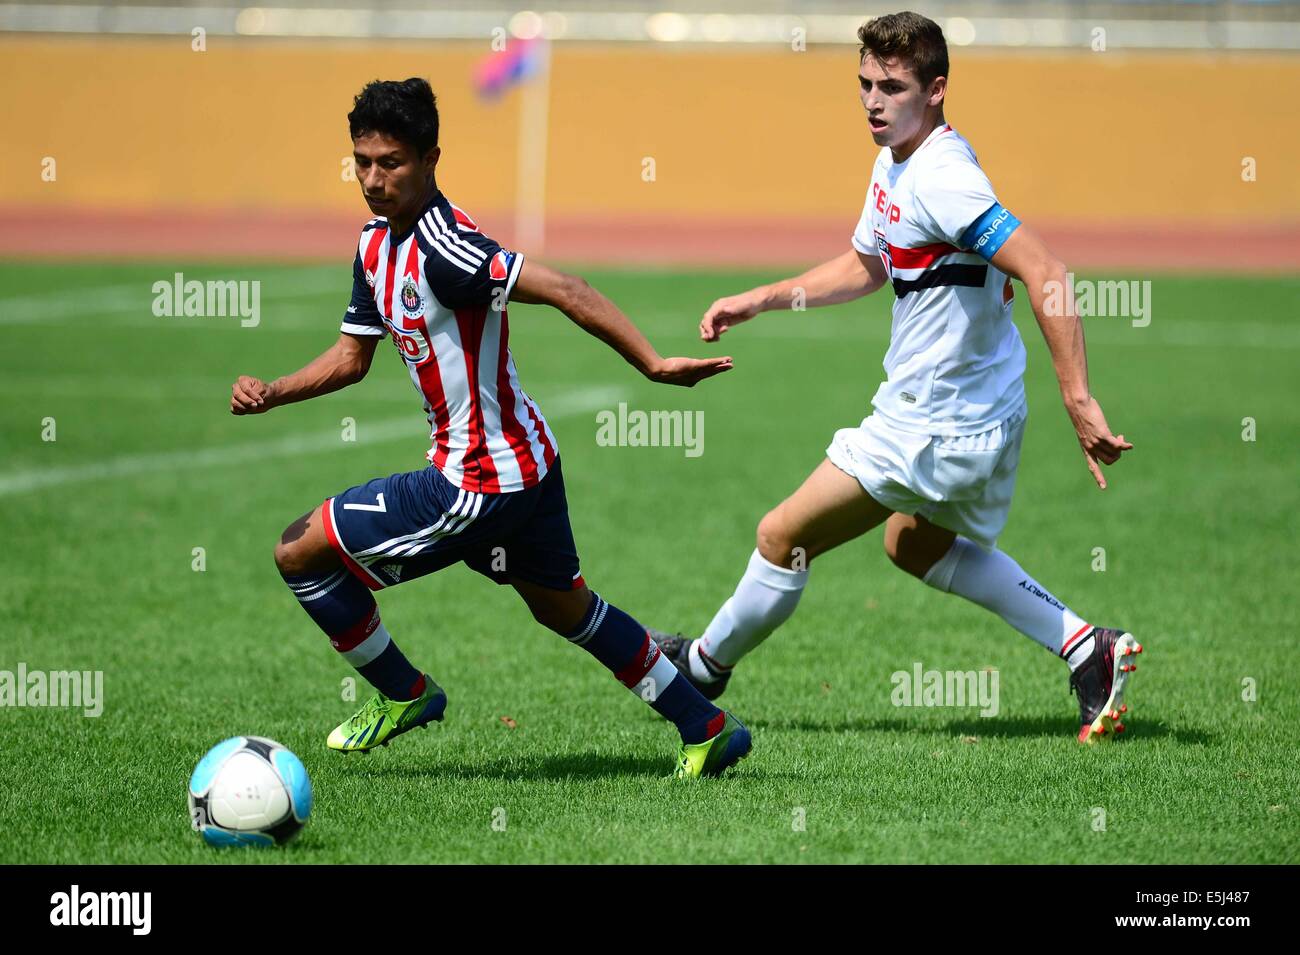 Weifang, China's Shandong Province. 2nd Aug, 2014. Domingos Gomes Hugo (R) of Sao Paulo Futebol vies for the ball during the third-place-final match against Chivas Guadalajara CD at the Weifang Cup International Youth Football Tournament in Weifang, east China's Shandong Province, Aug. 2, 2014. Sao Paulo Futebol won 1-0 and won the third place of the event. © Guo Xulei/Xinhua/Alamy Live News Stock Photo